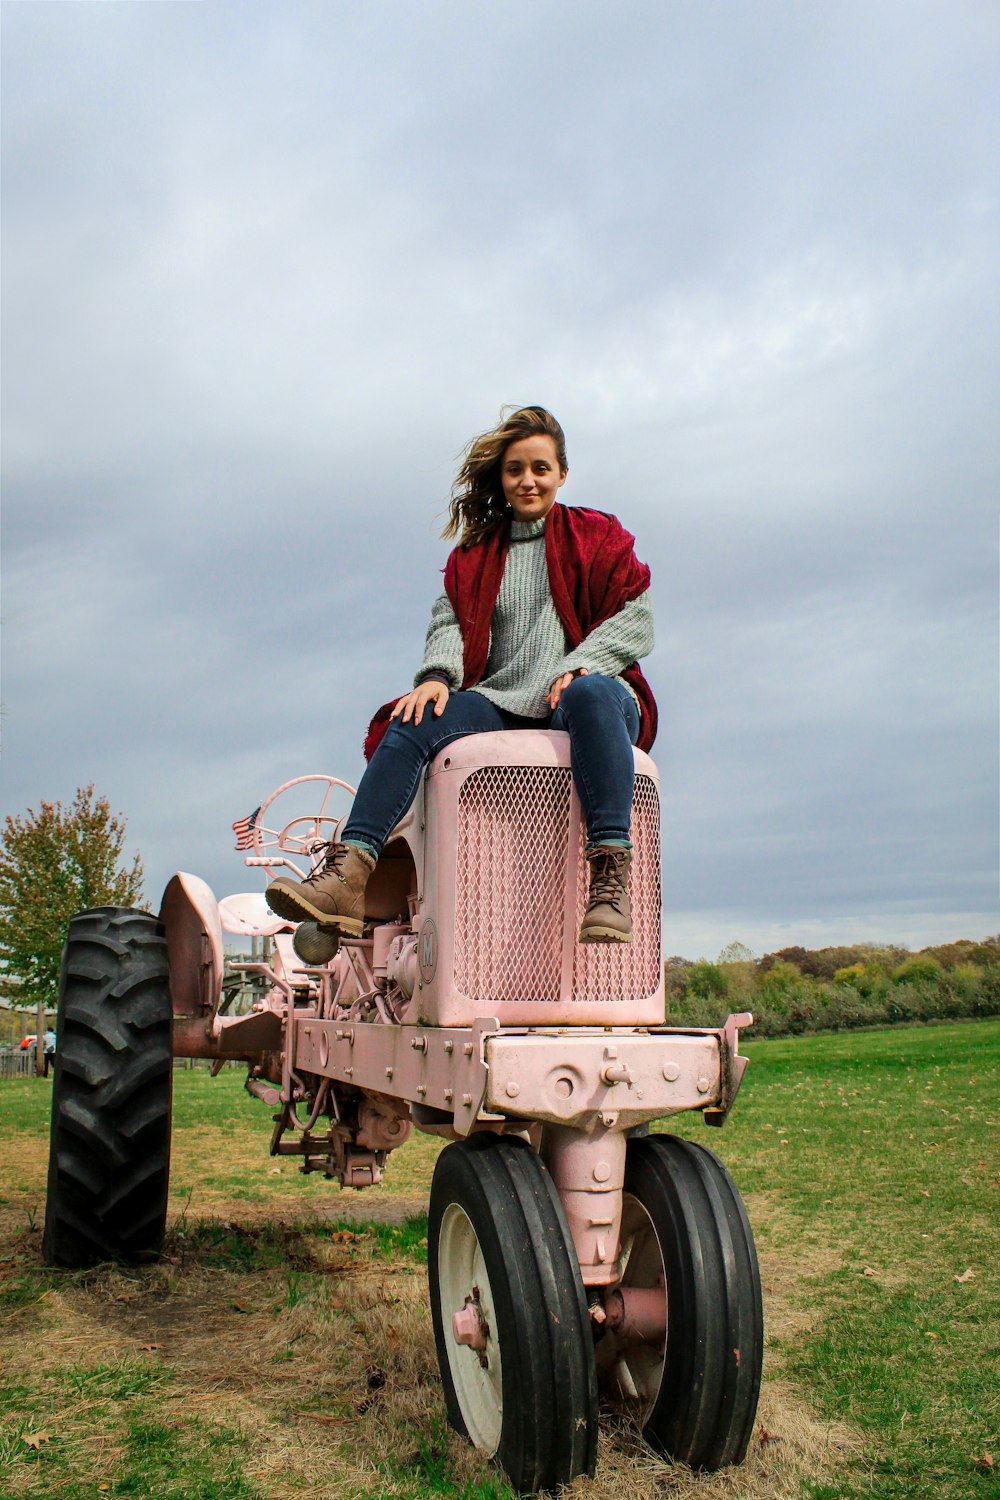 woman in red long sleeve shirt riding red tractor on green grass field during daytime